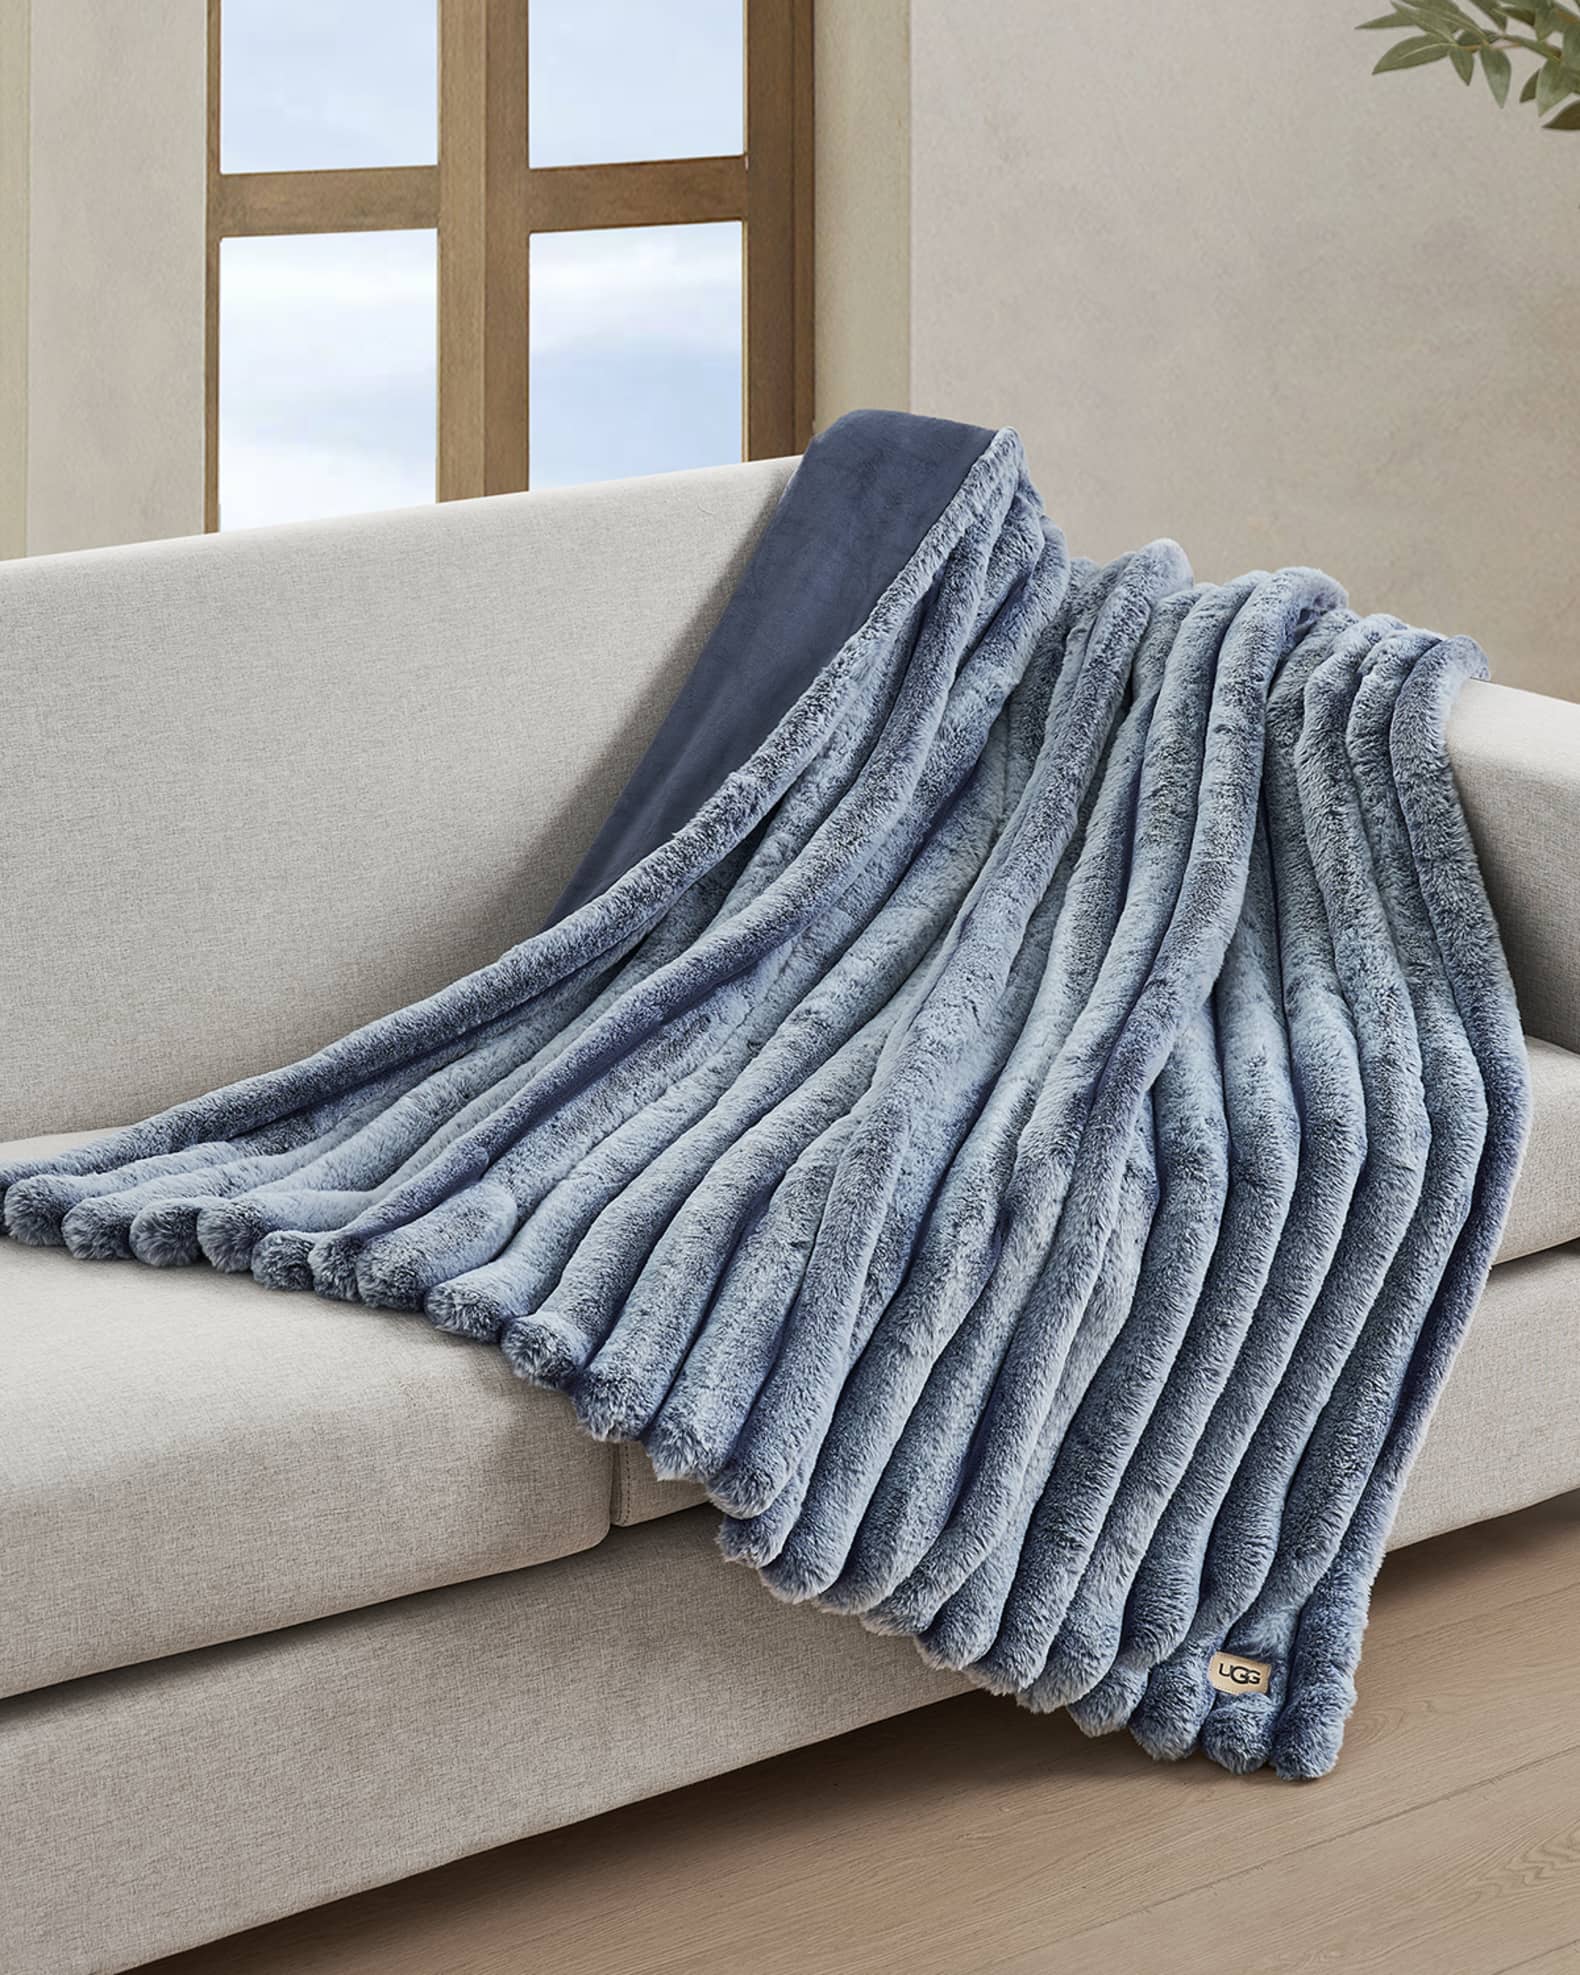 Ugg Channel Quilt Faux Fur Throw Blanket in Lighthouse